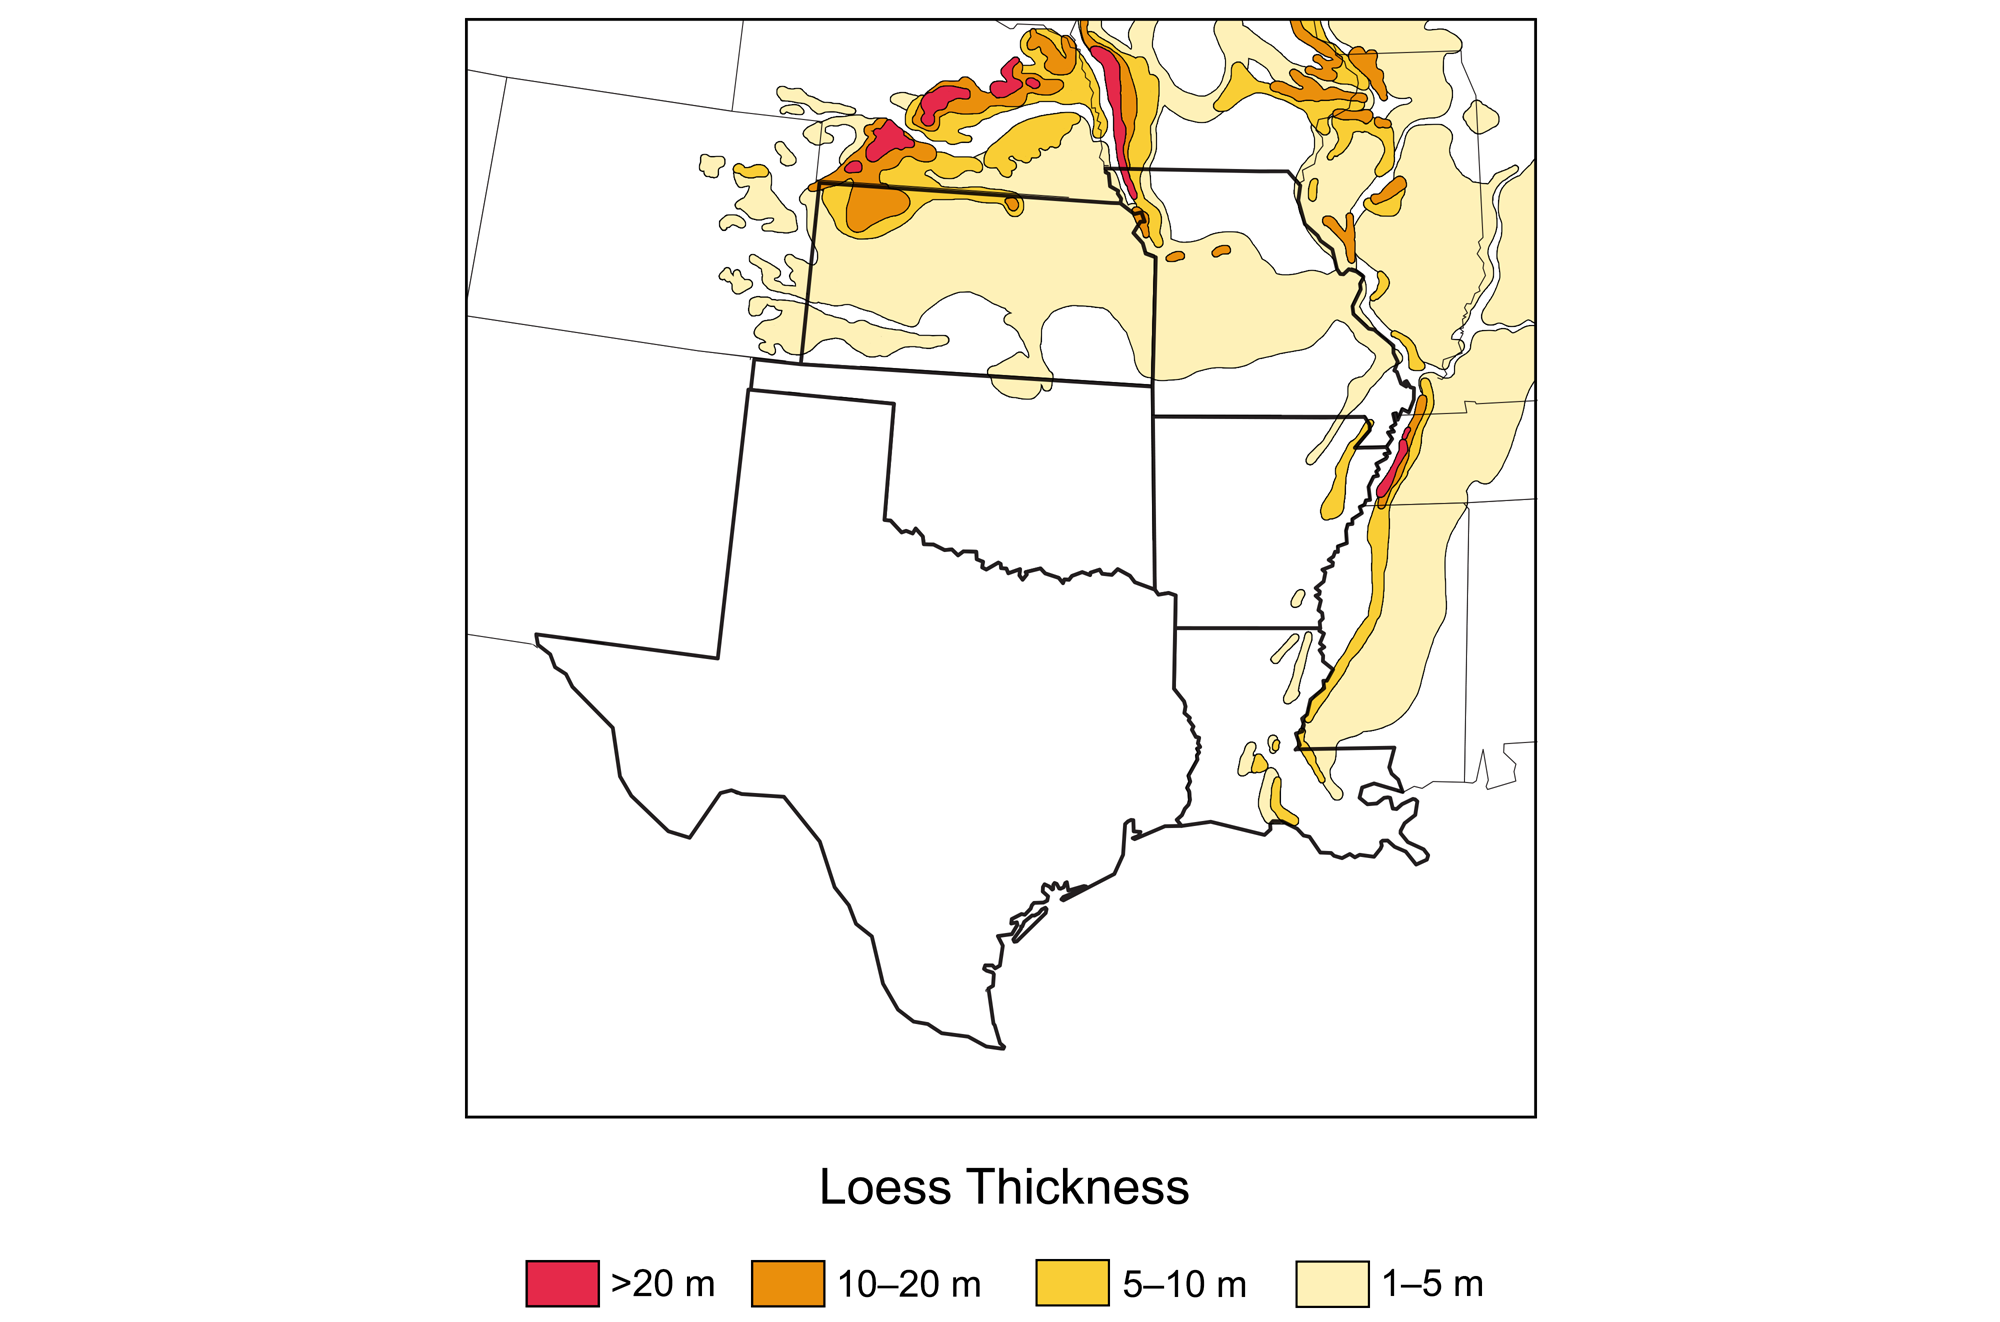 Map showing the south-central U.S. with state borders outlined. Loess deposits are shaded on the map, with the thickest (over 20 meters) shaded red and the thinnest (1 to 5 meters) shaded light yellow. Much of Kansas and Missouri has loess deposits.